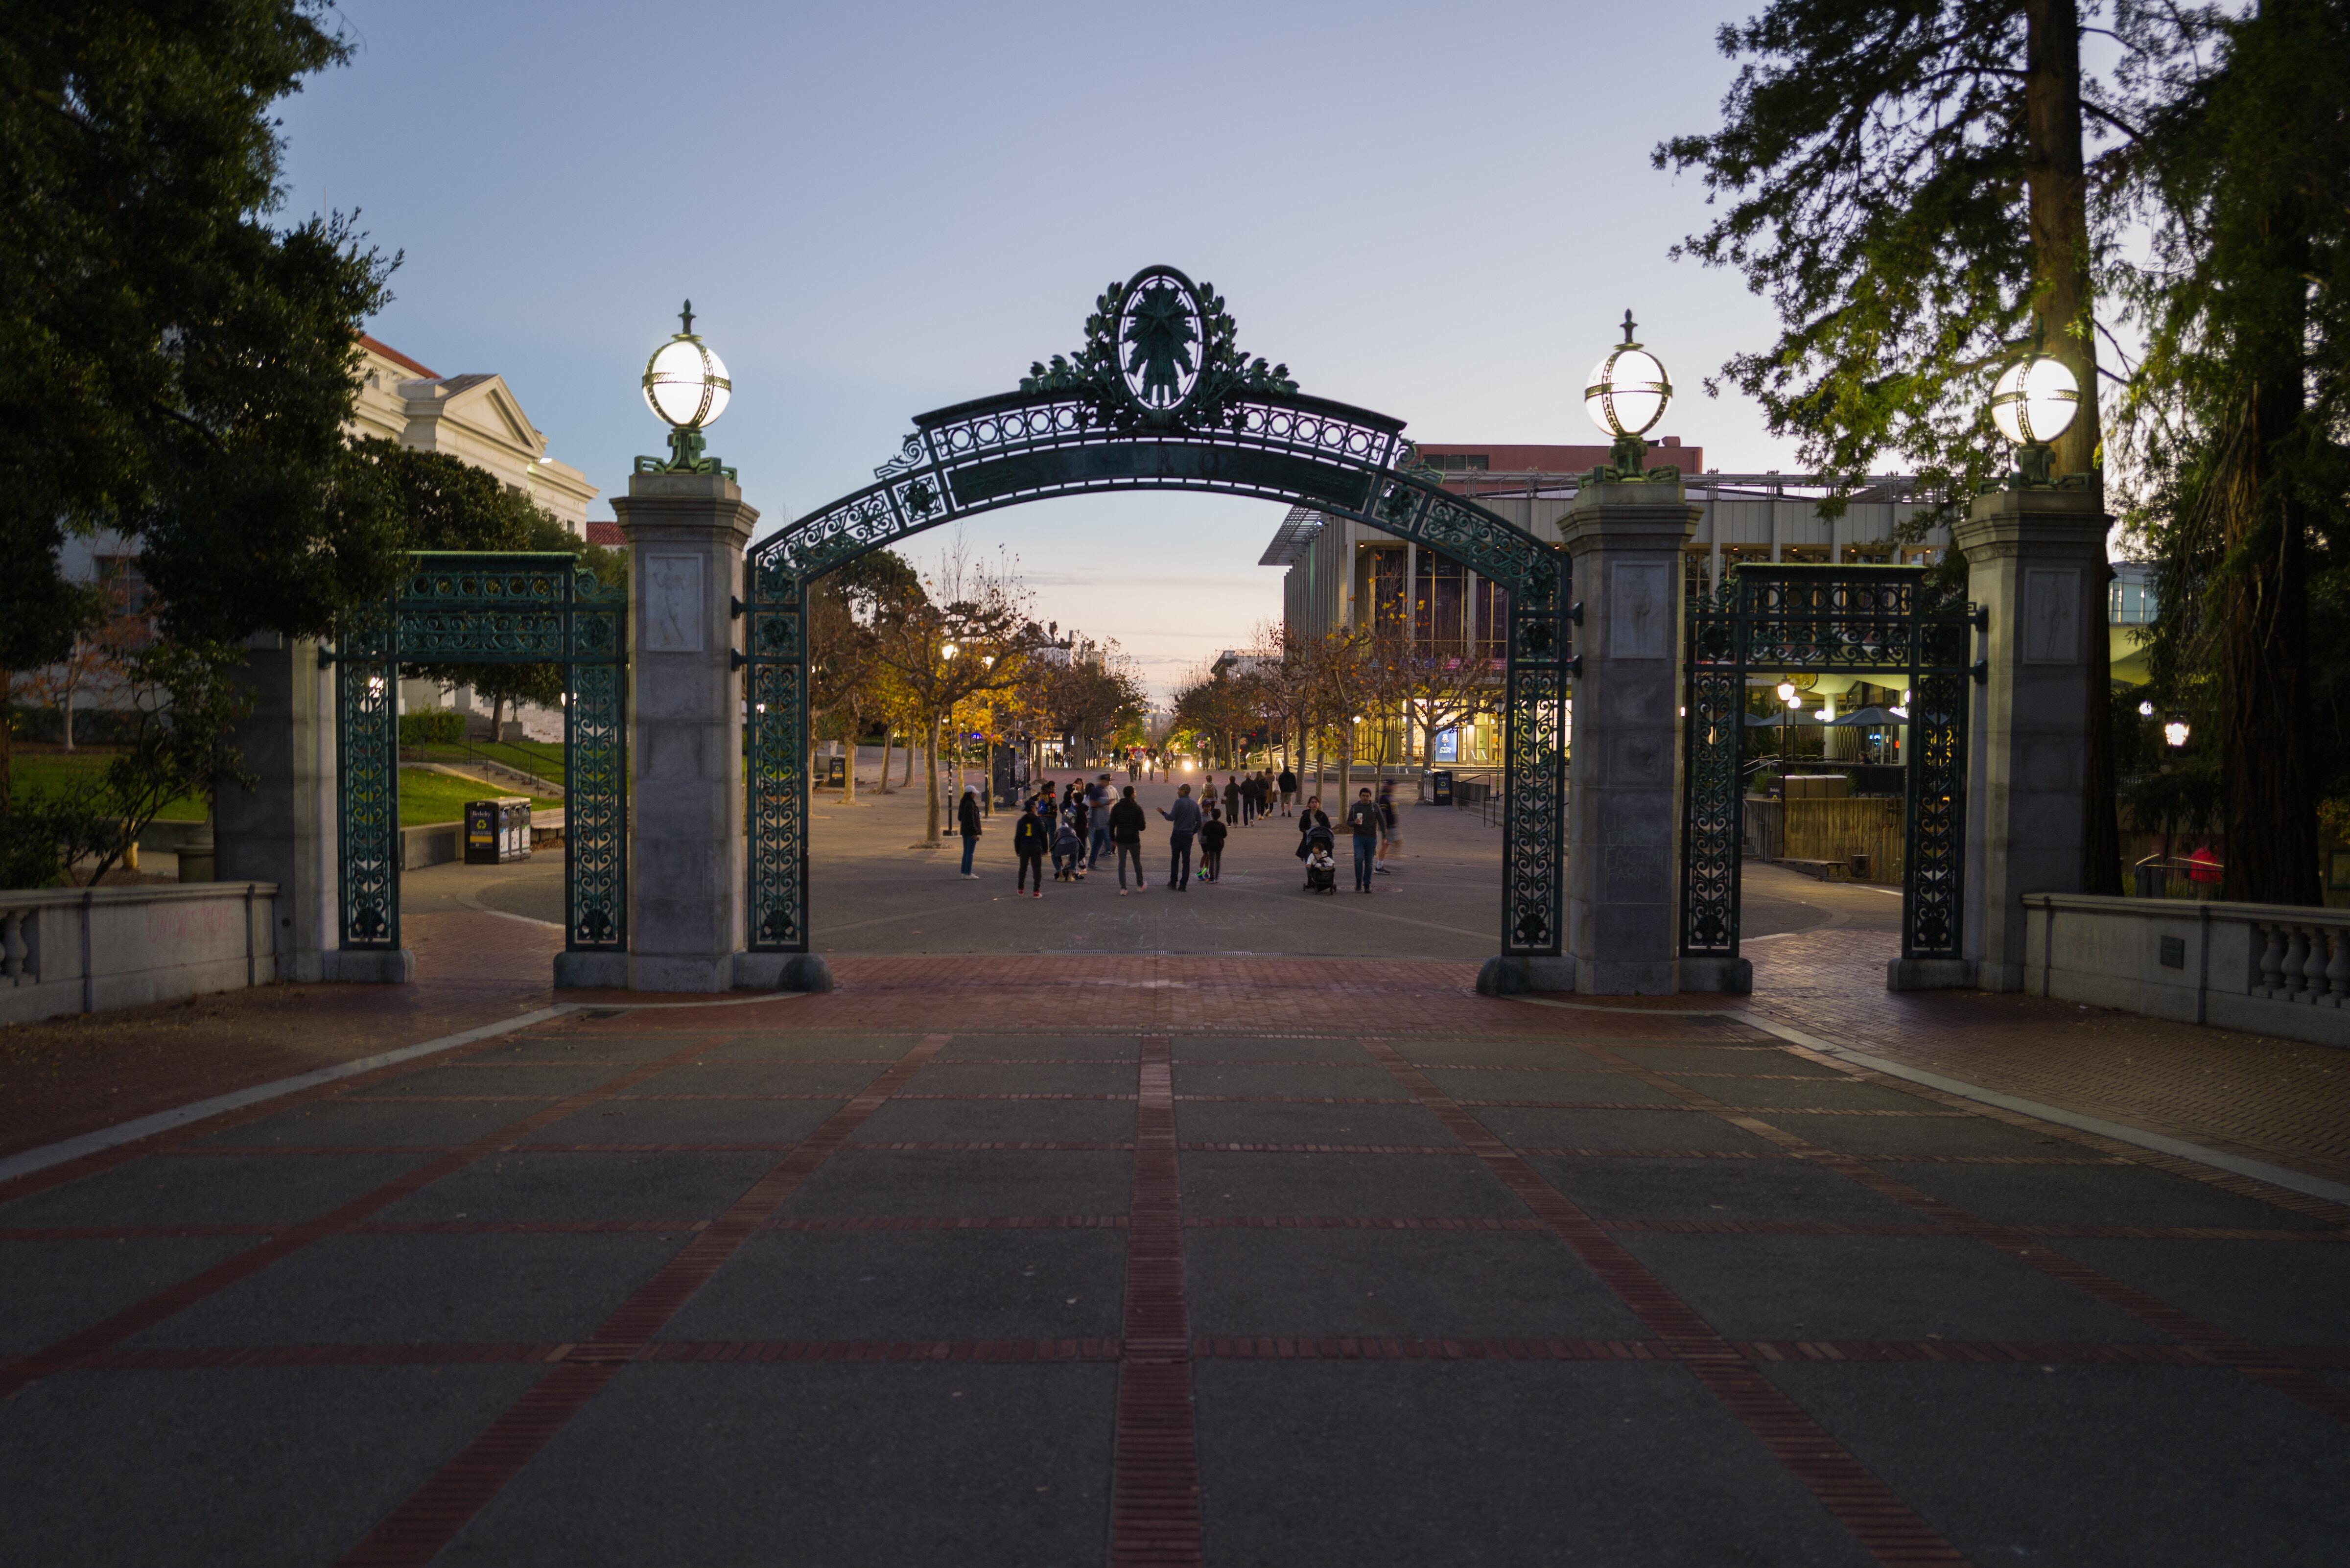  Sather Gate